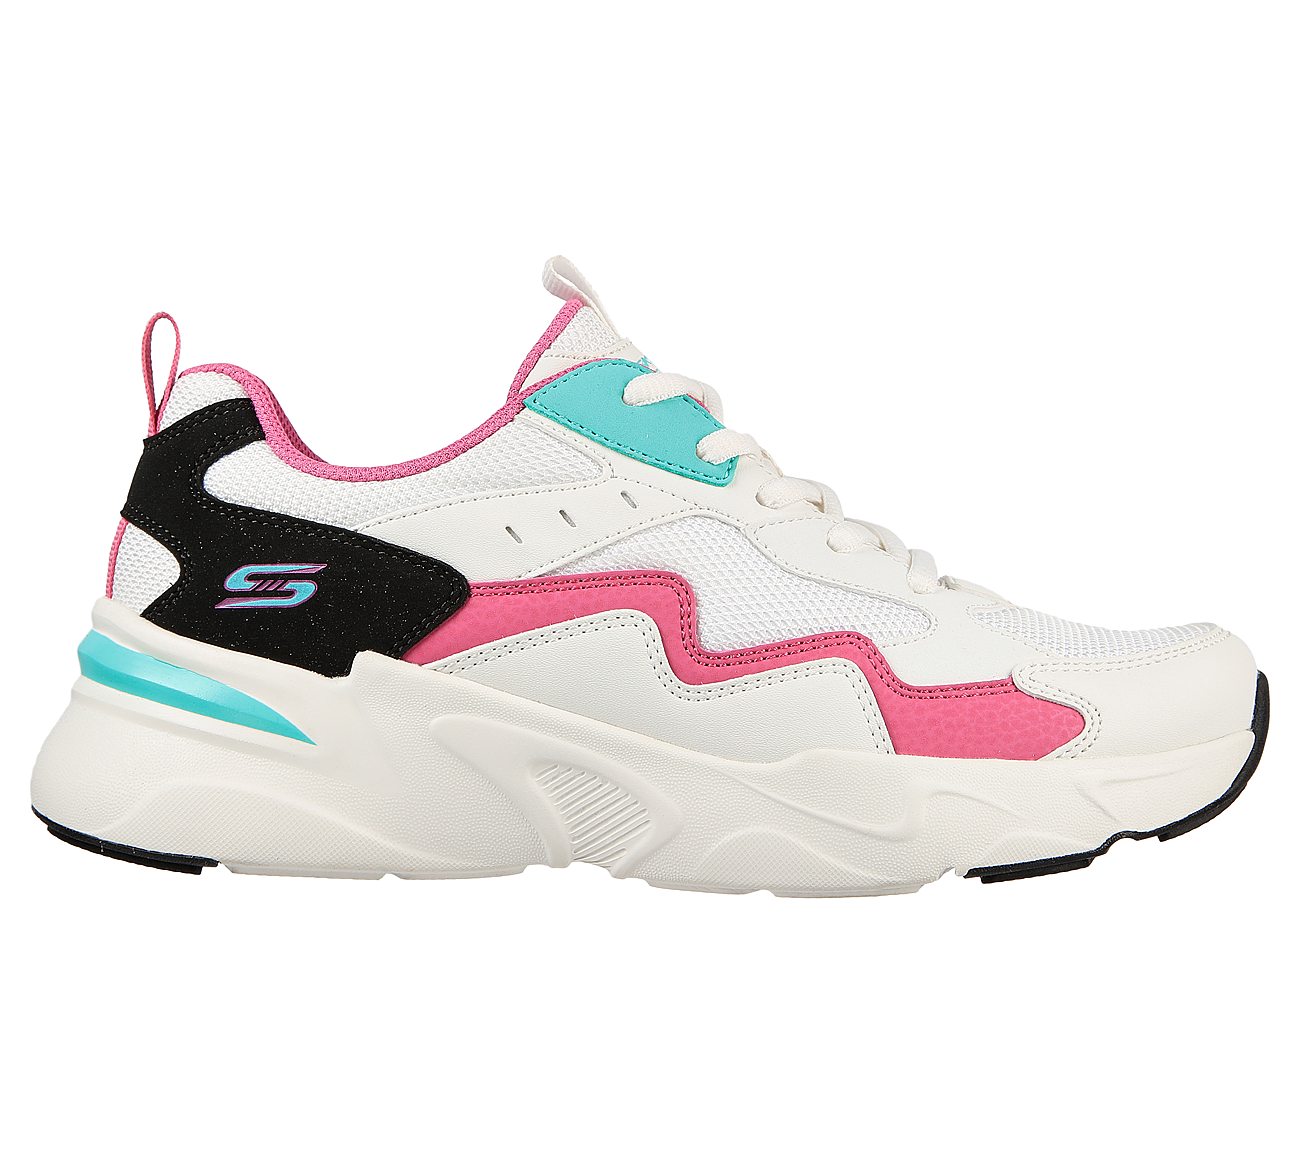 BOBS BAMINA-ZIGZAGGER, WHITE/PINK/TURQUOISE Footwear Lateral View